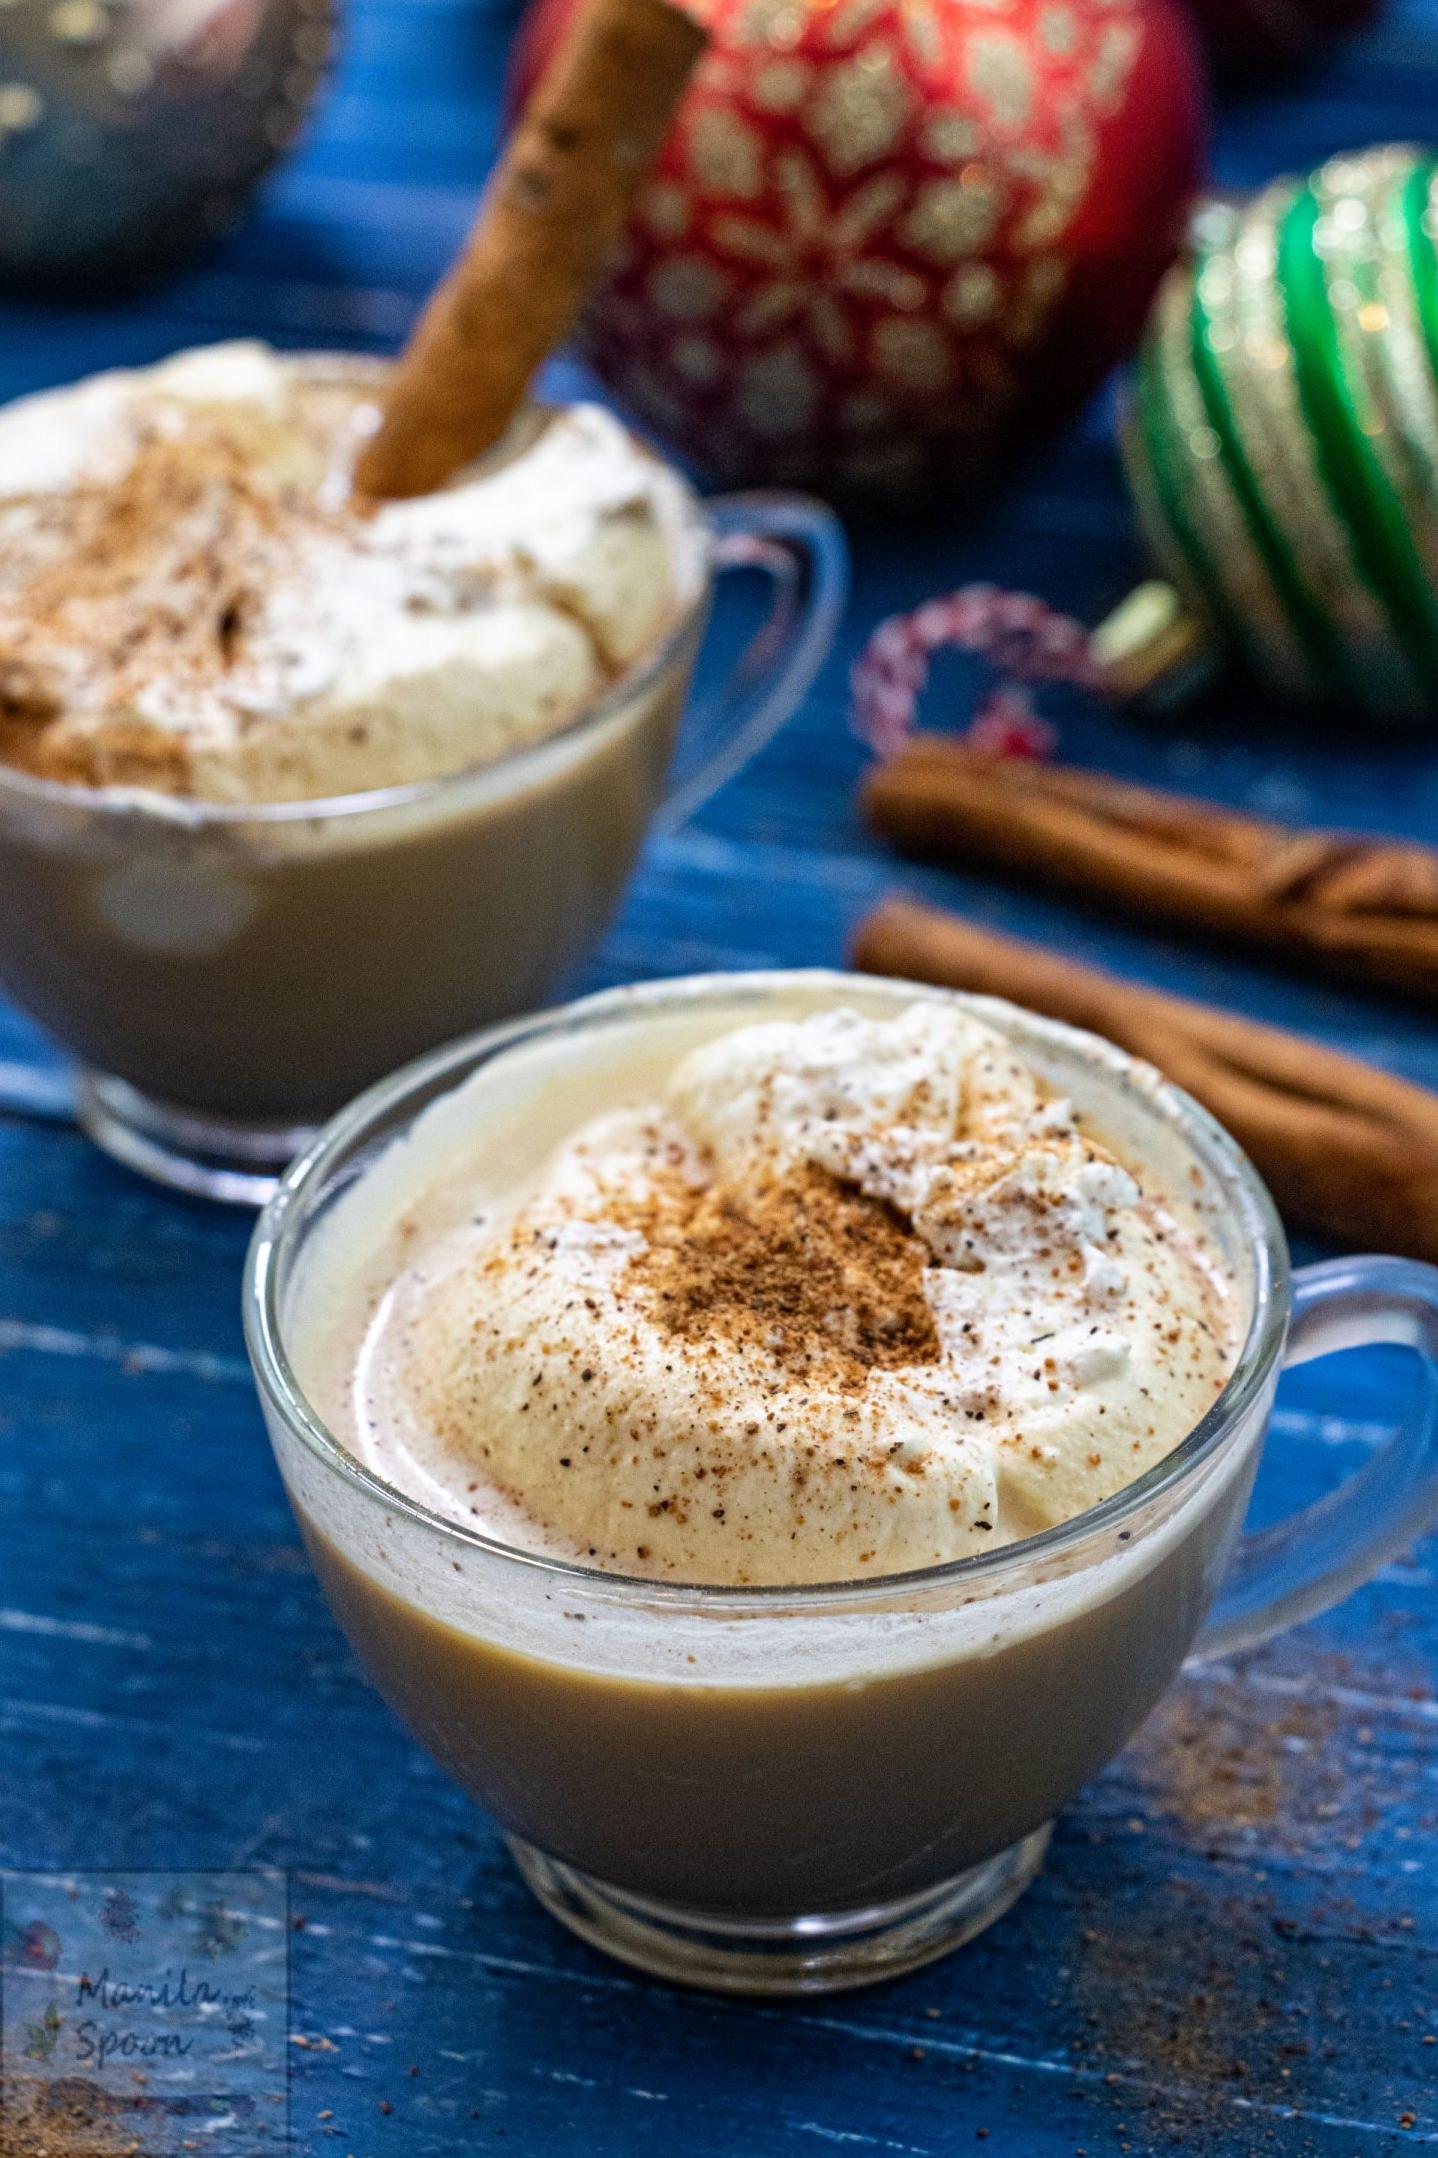  Take a sip and let the flavors of nutmeg and coffee dance on your taste buds